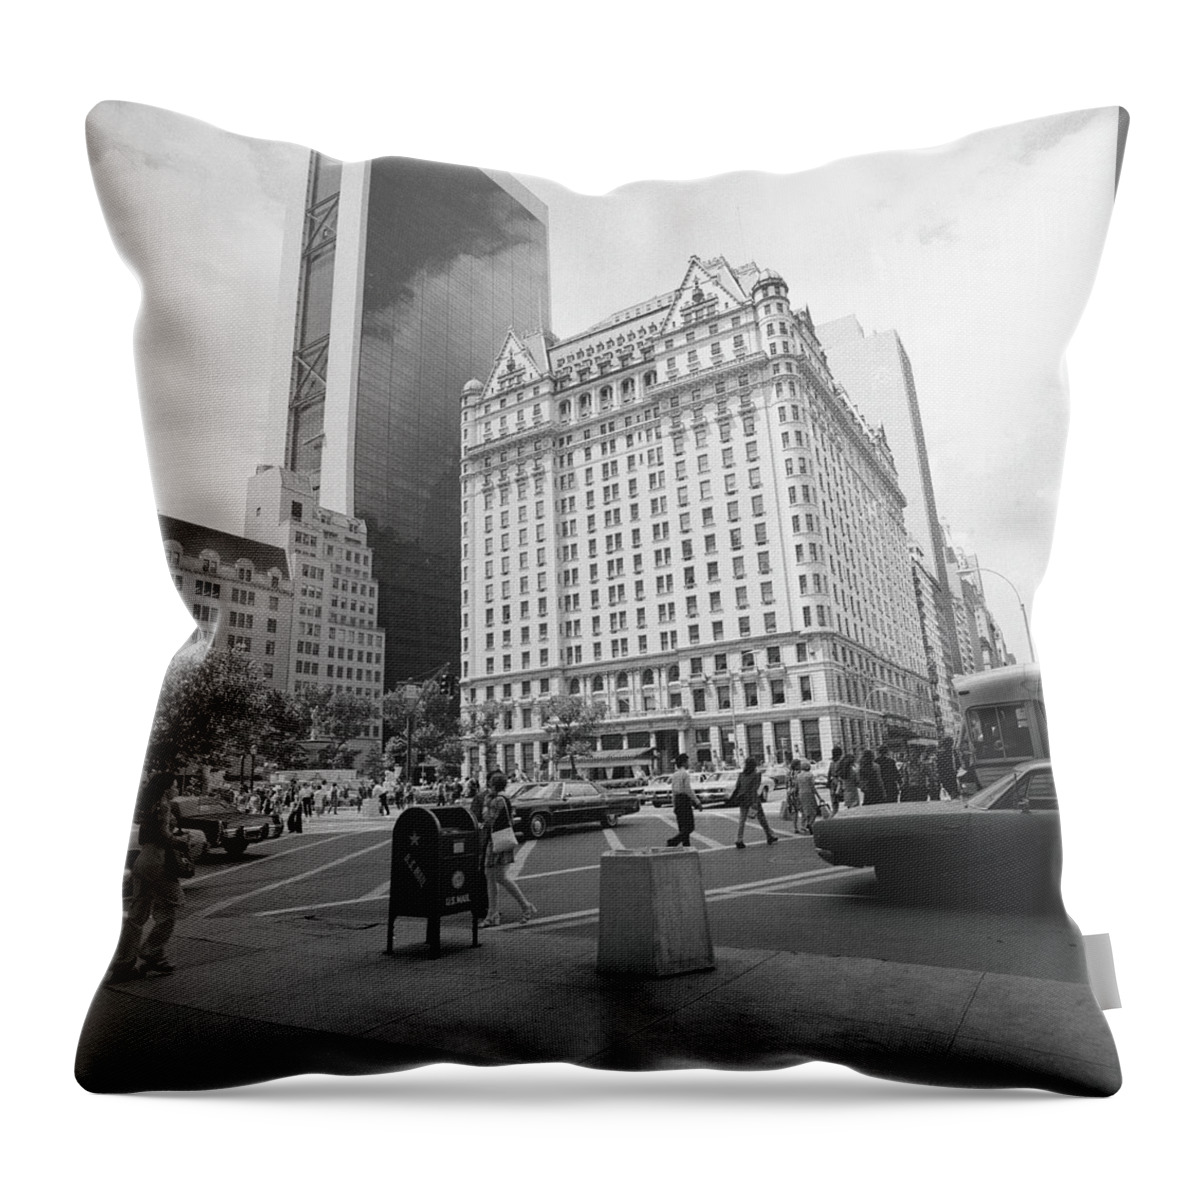 Pedestrian Throw Pillow featuring the photograph Buildings And Street, New York City by George Marks